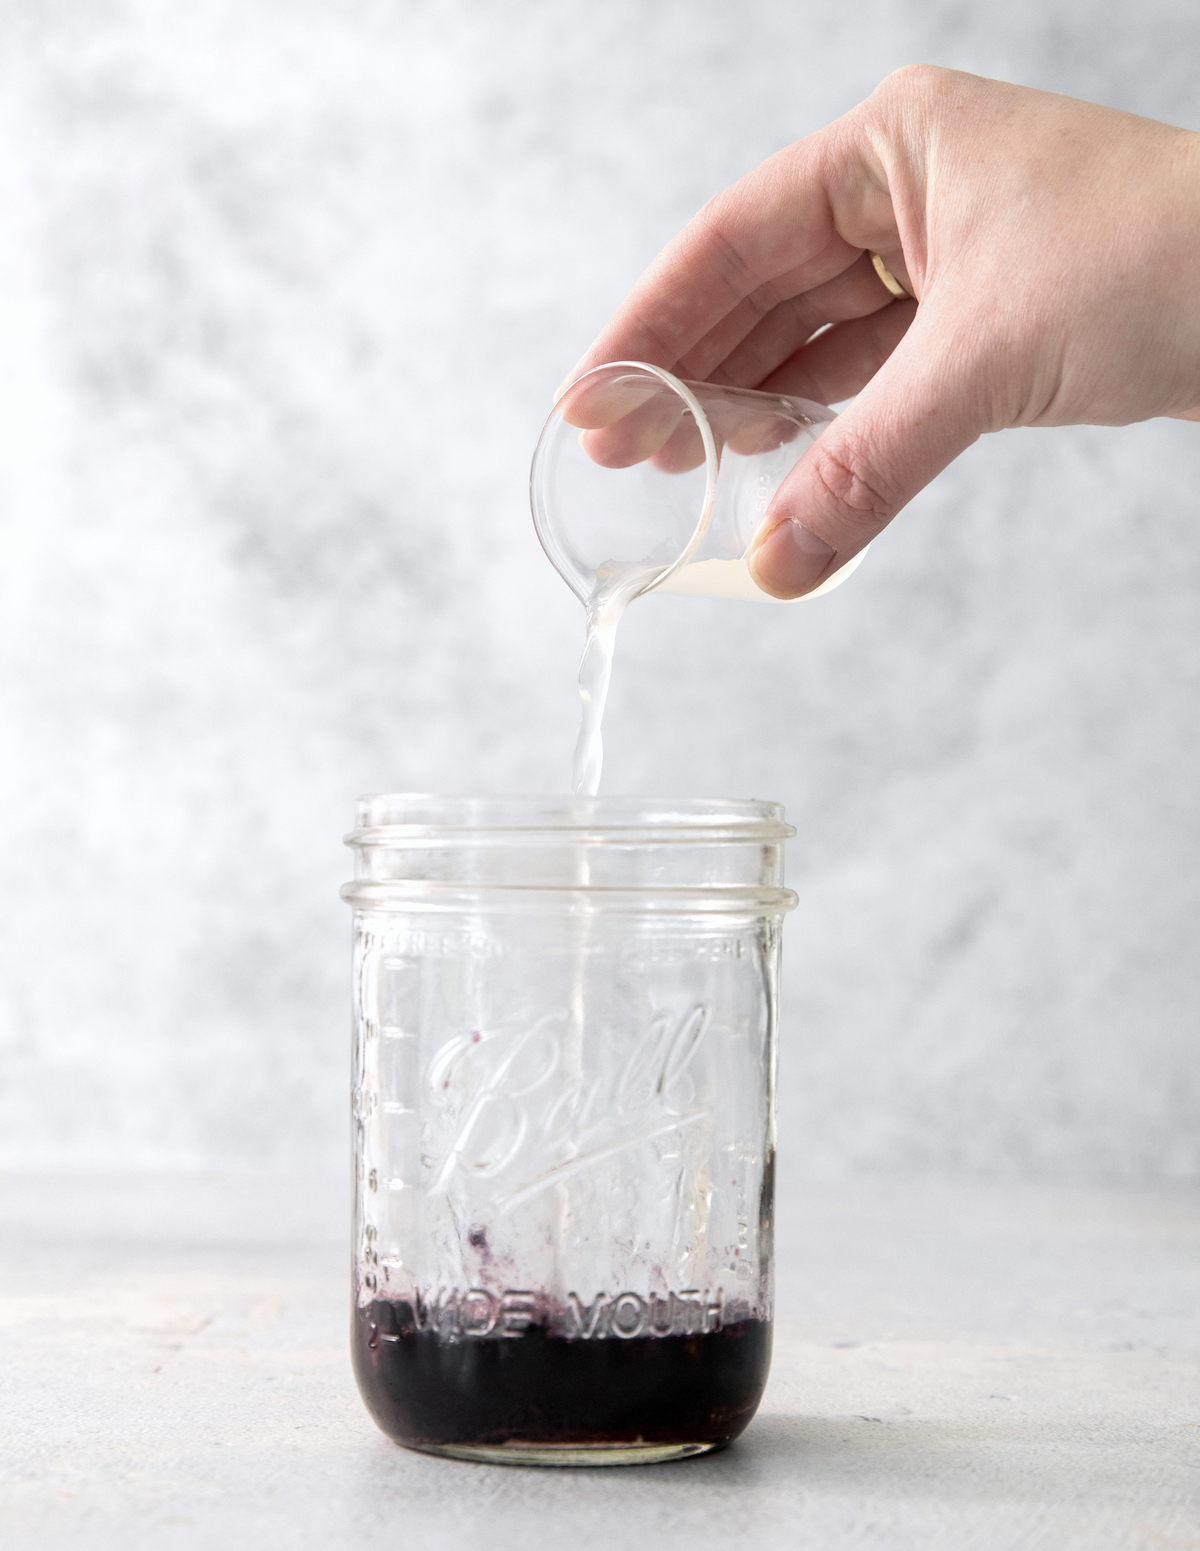 Adding liquor to the mason jar with simple syrup and blackberries